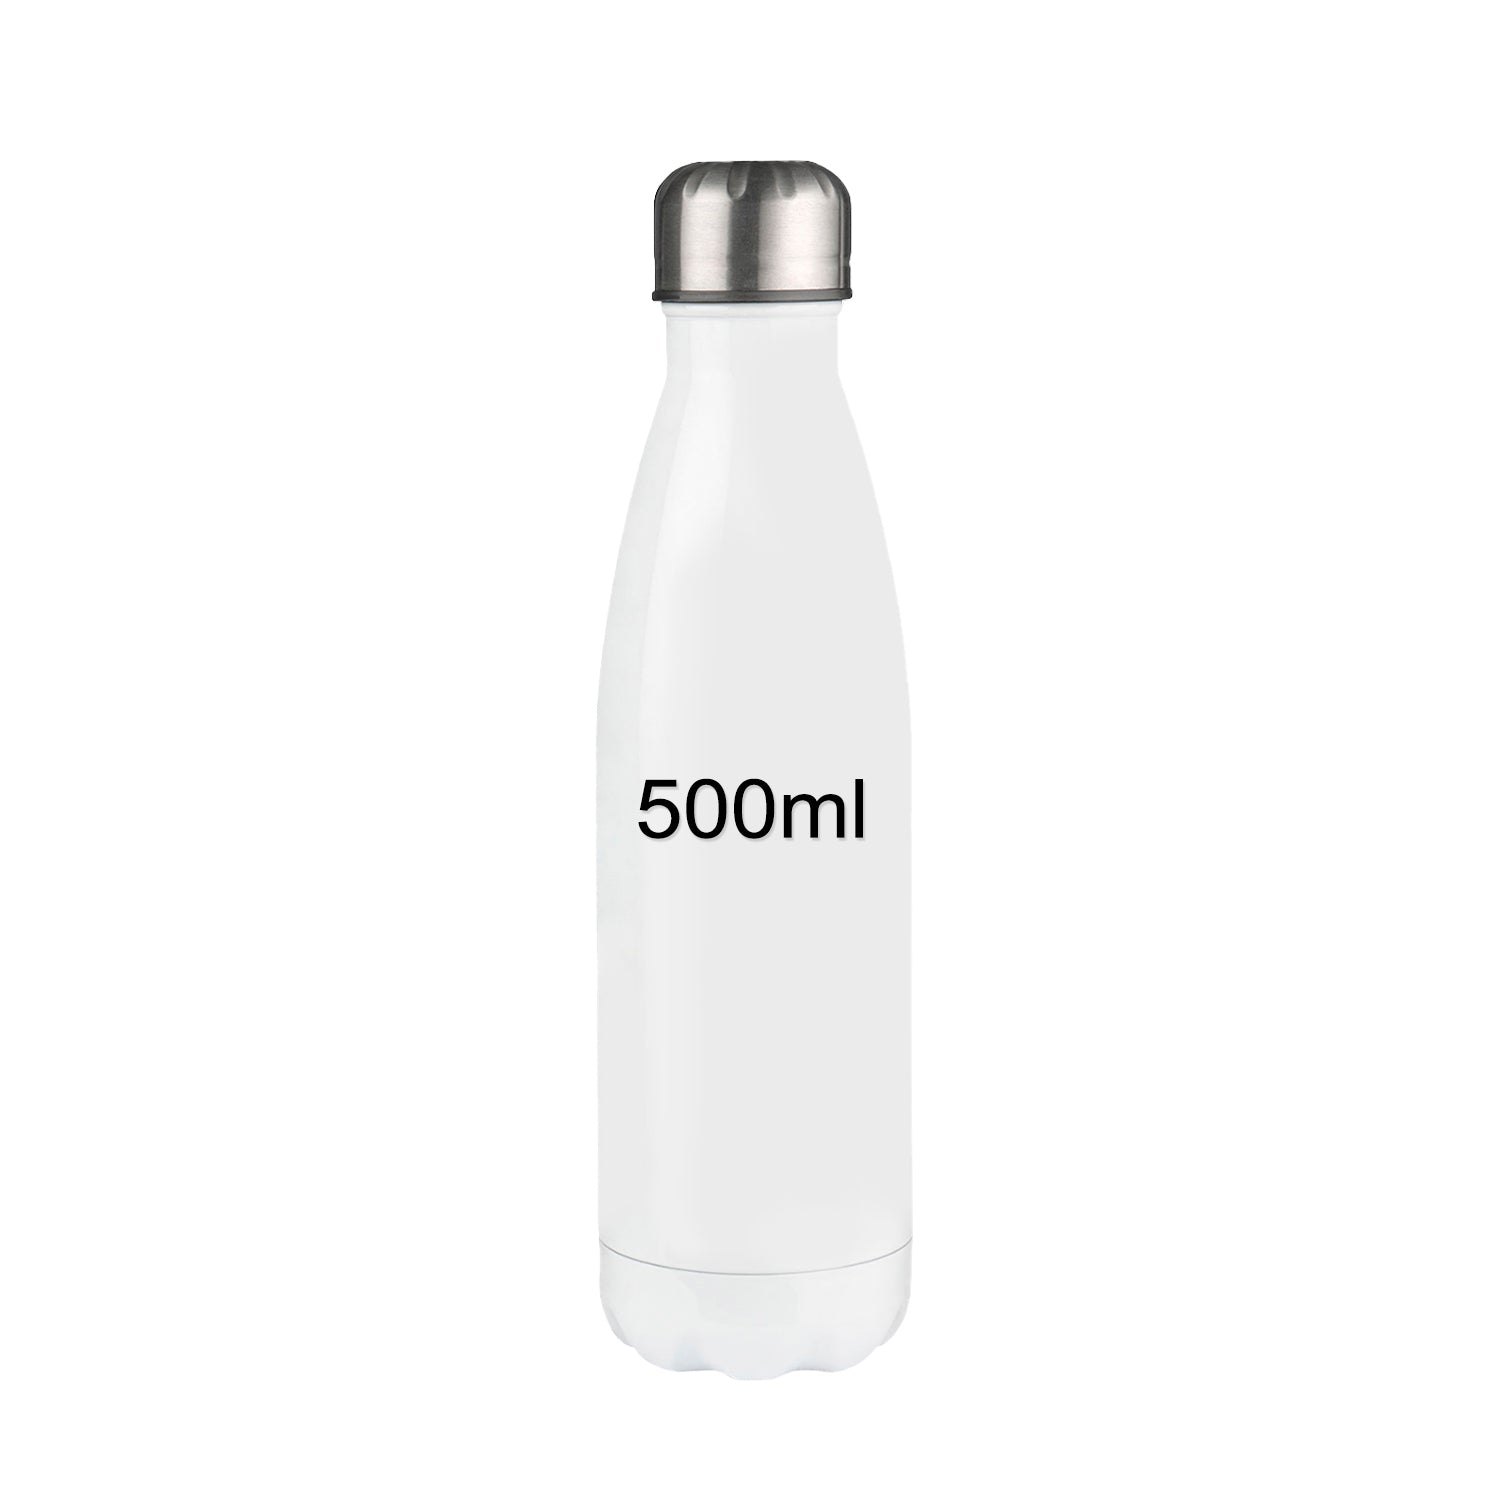 SubliKing® Thermo drinking bottles made of stainless steel for sublimation 500ml or 750ml 